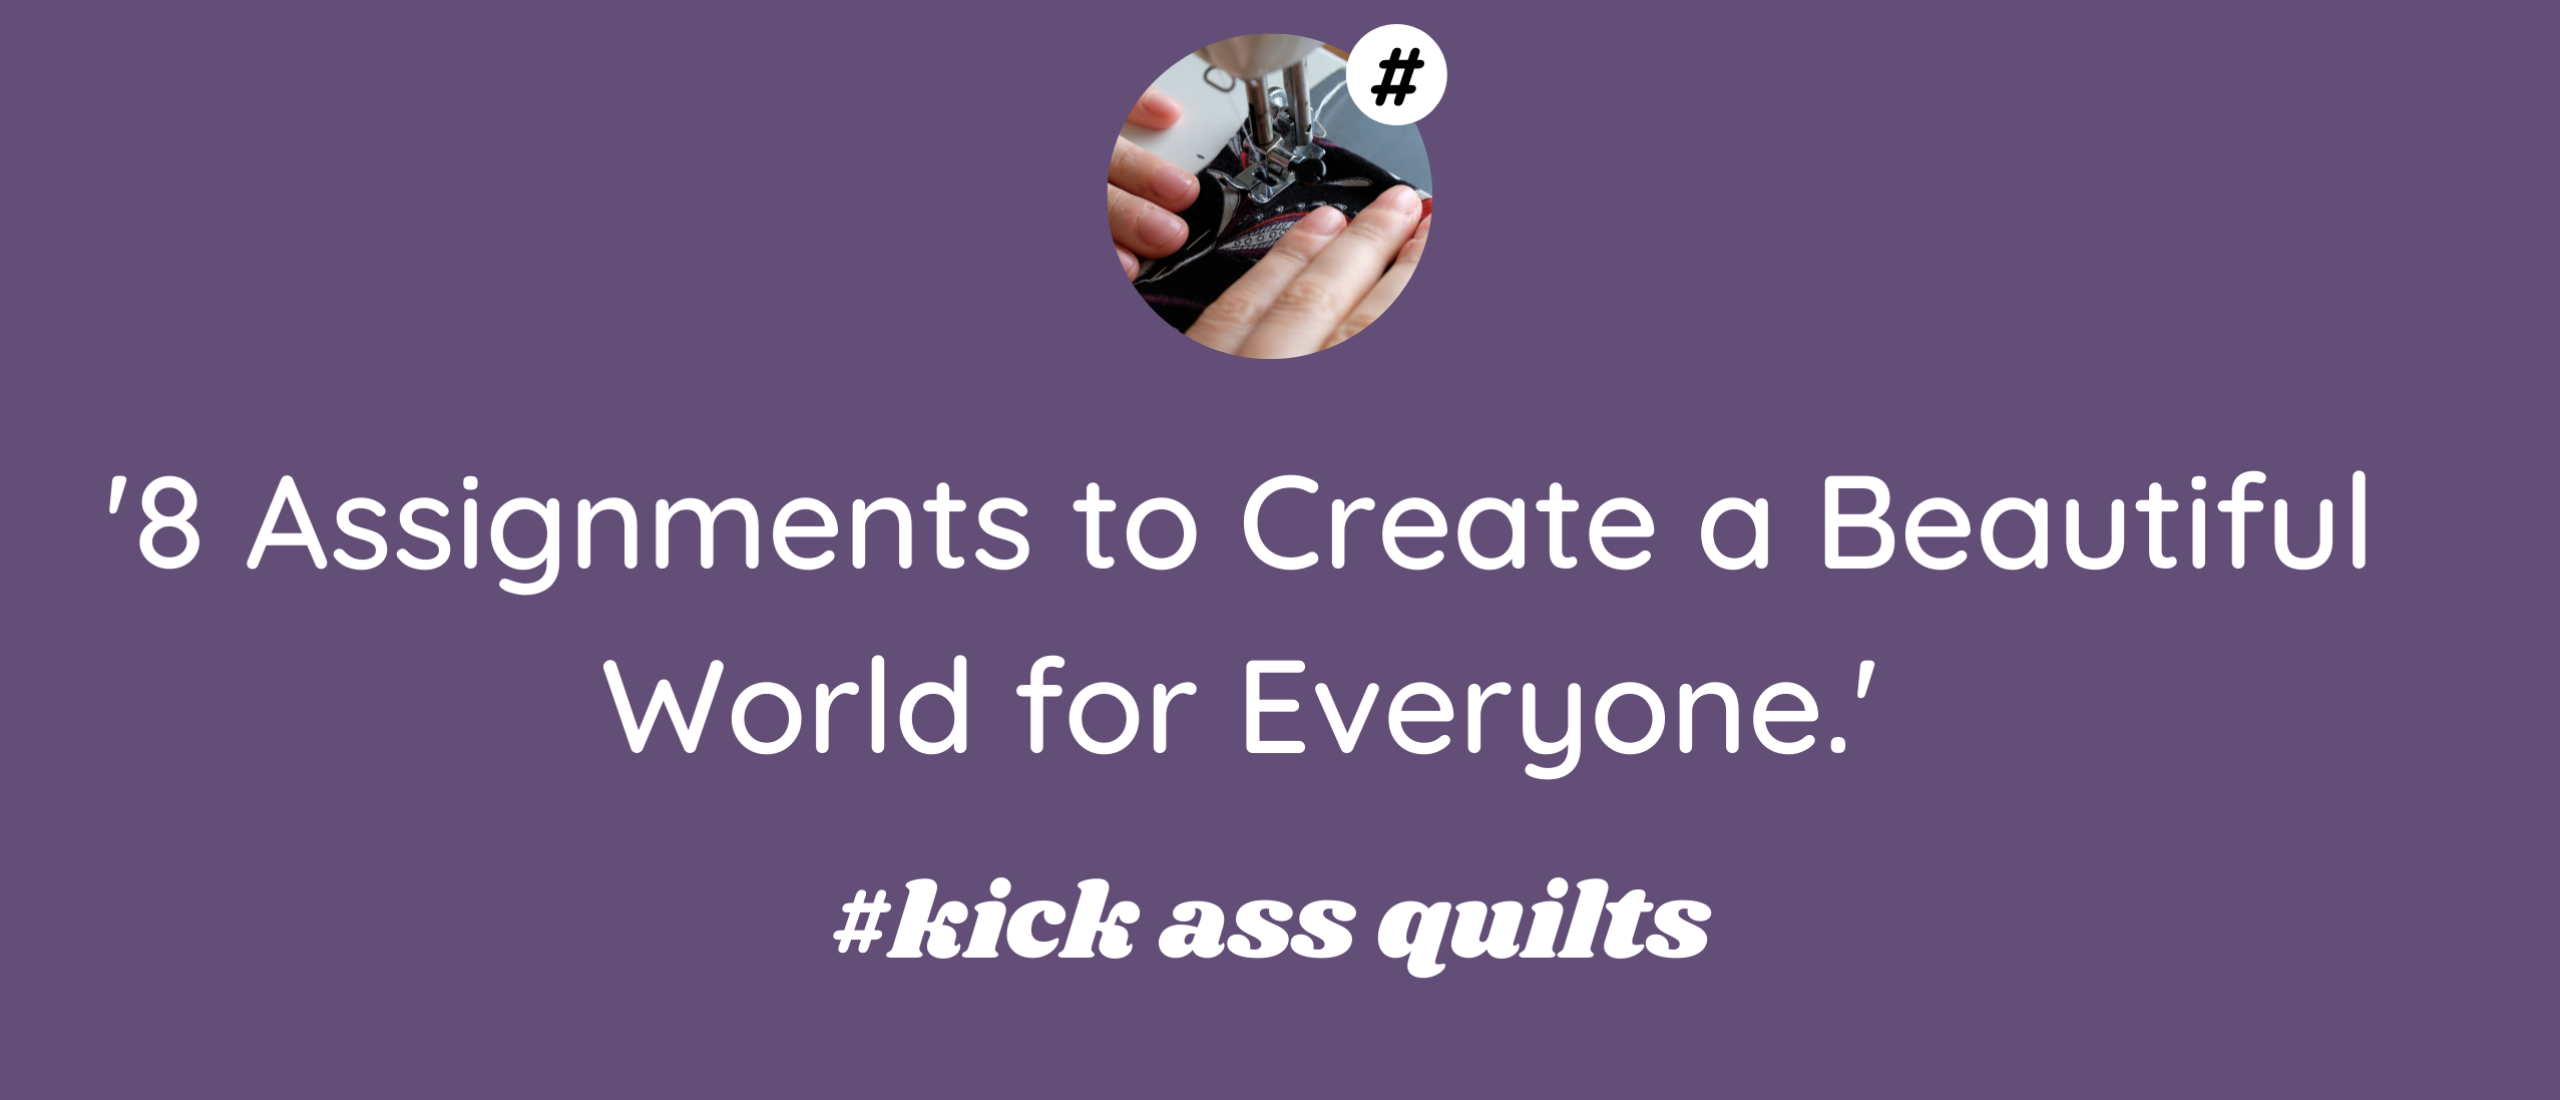 8 assignments to create a beautiful world for everyone - Weekly Quilt Inspiration #8